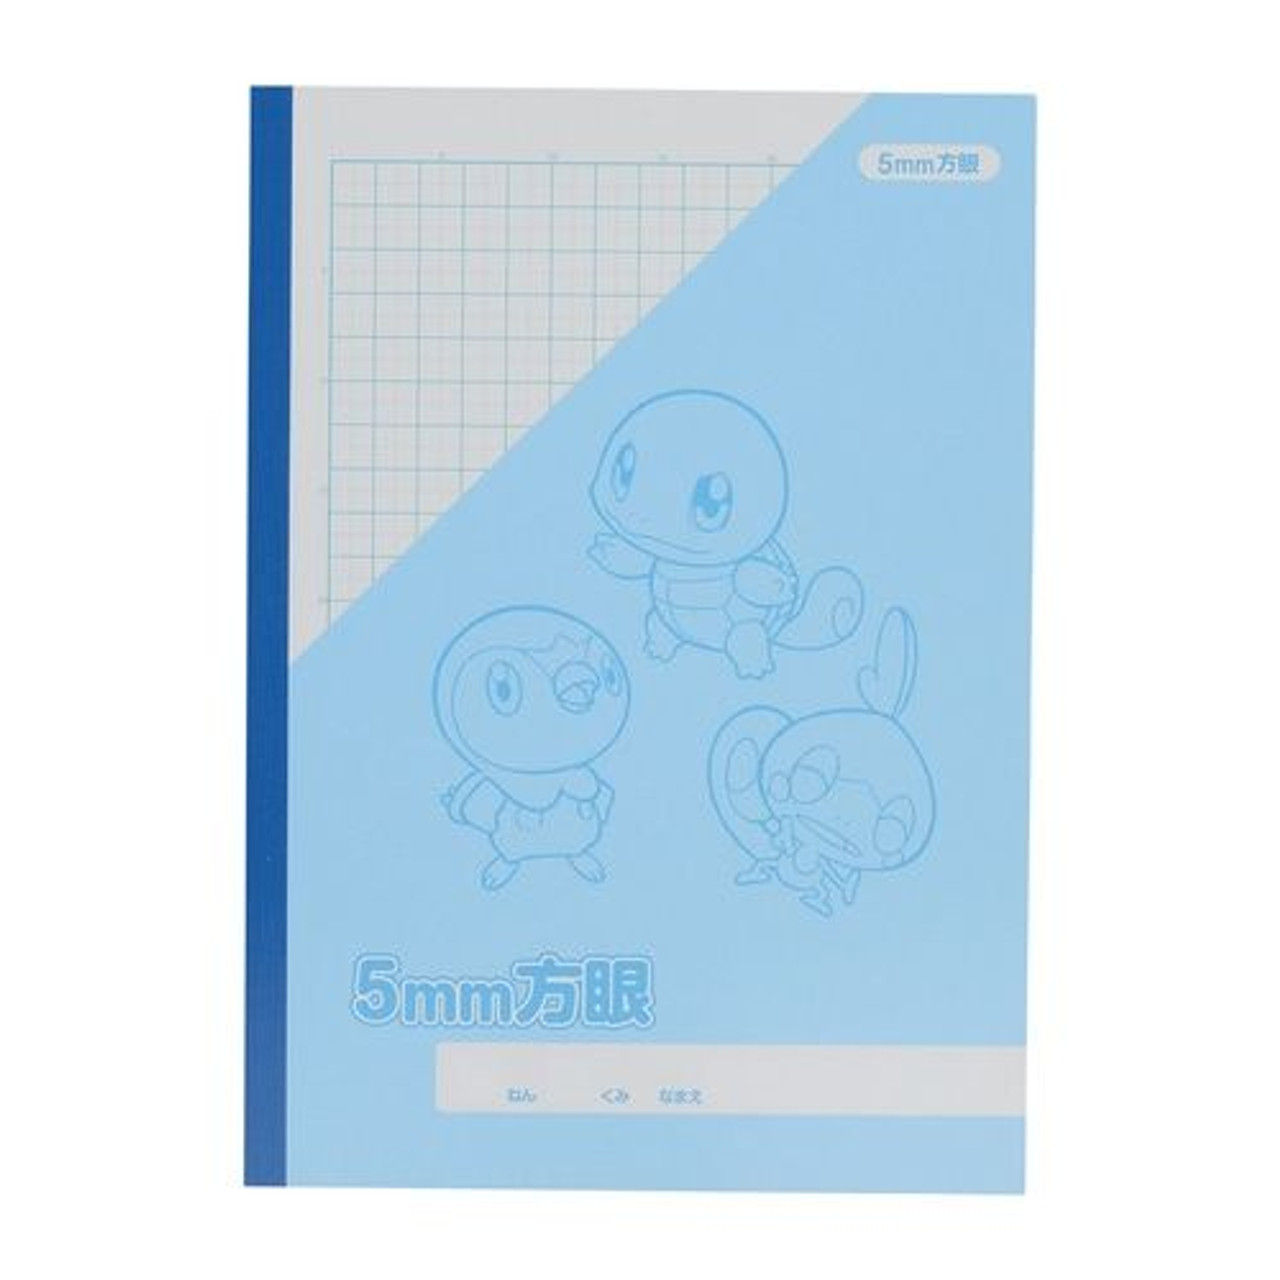 Pokemon notebook 5mm Grid made in JAPAN